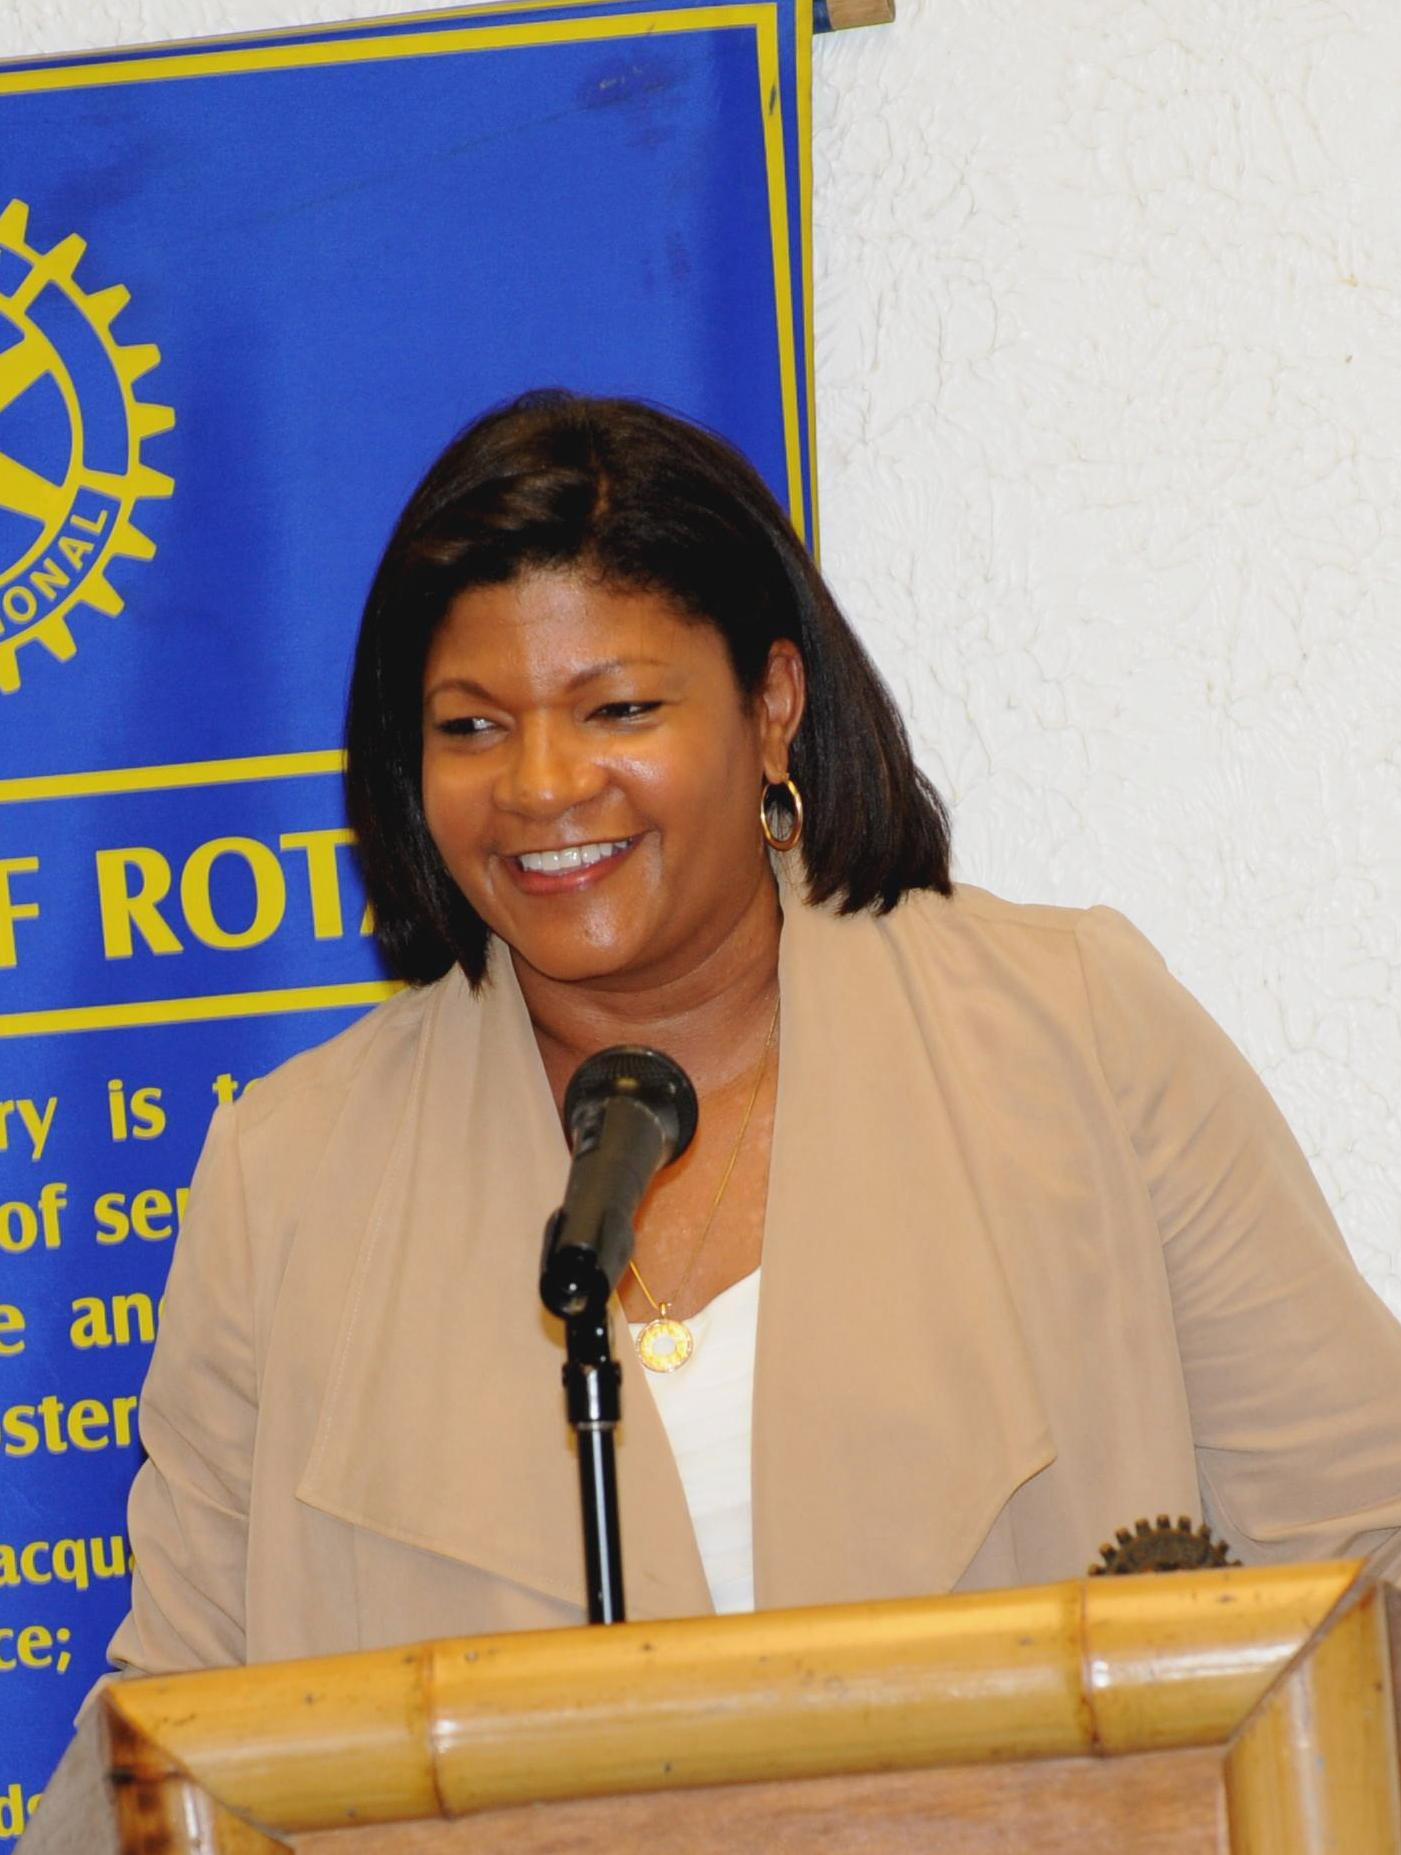 First Lady Cecile deJongh at Rotary on Wednesday.